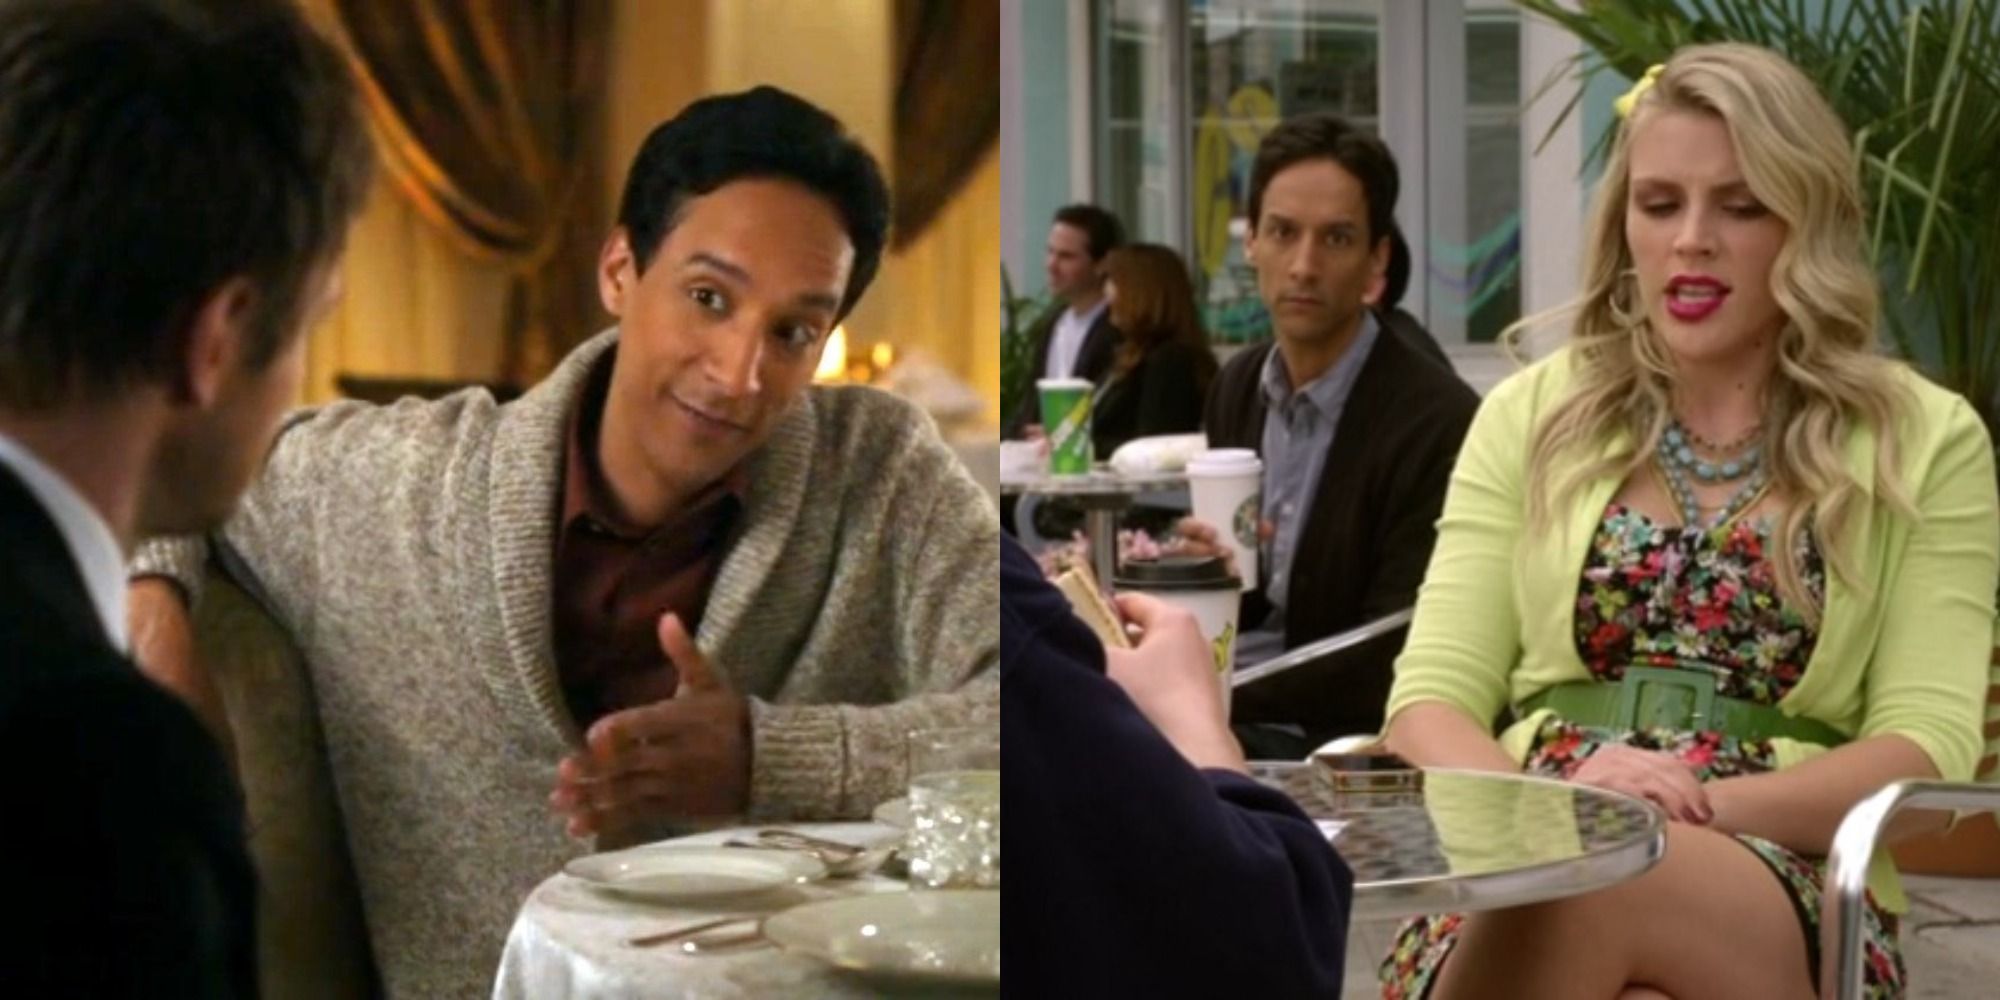 Split image of Abed in Community and Cougar Town